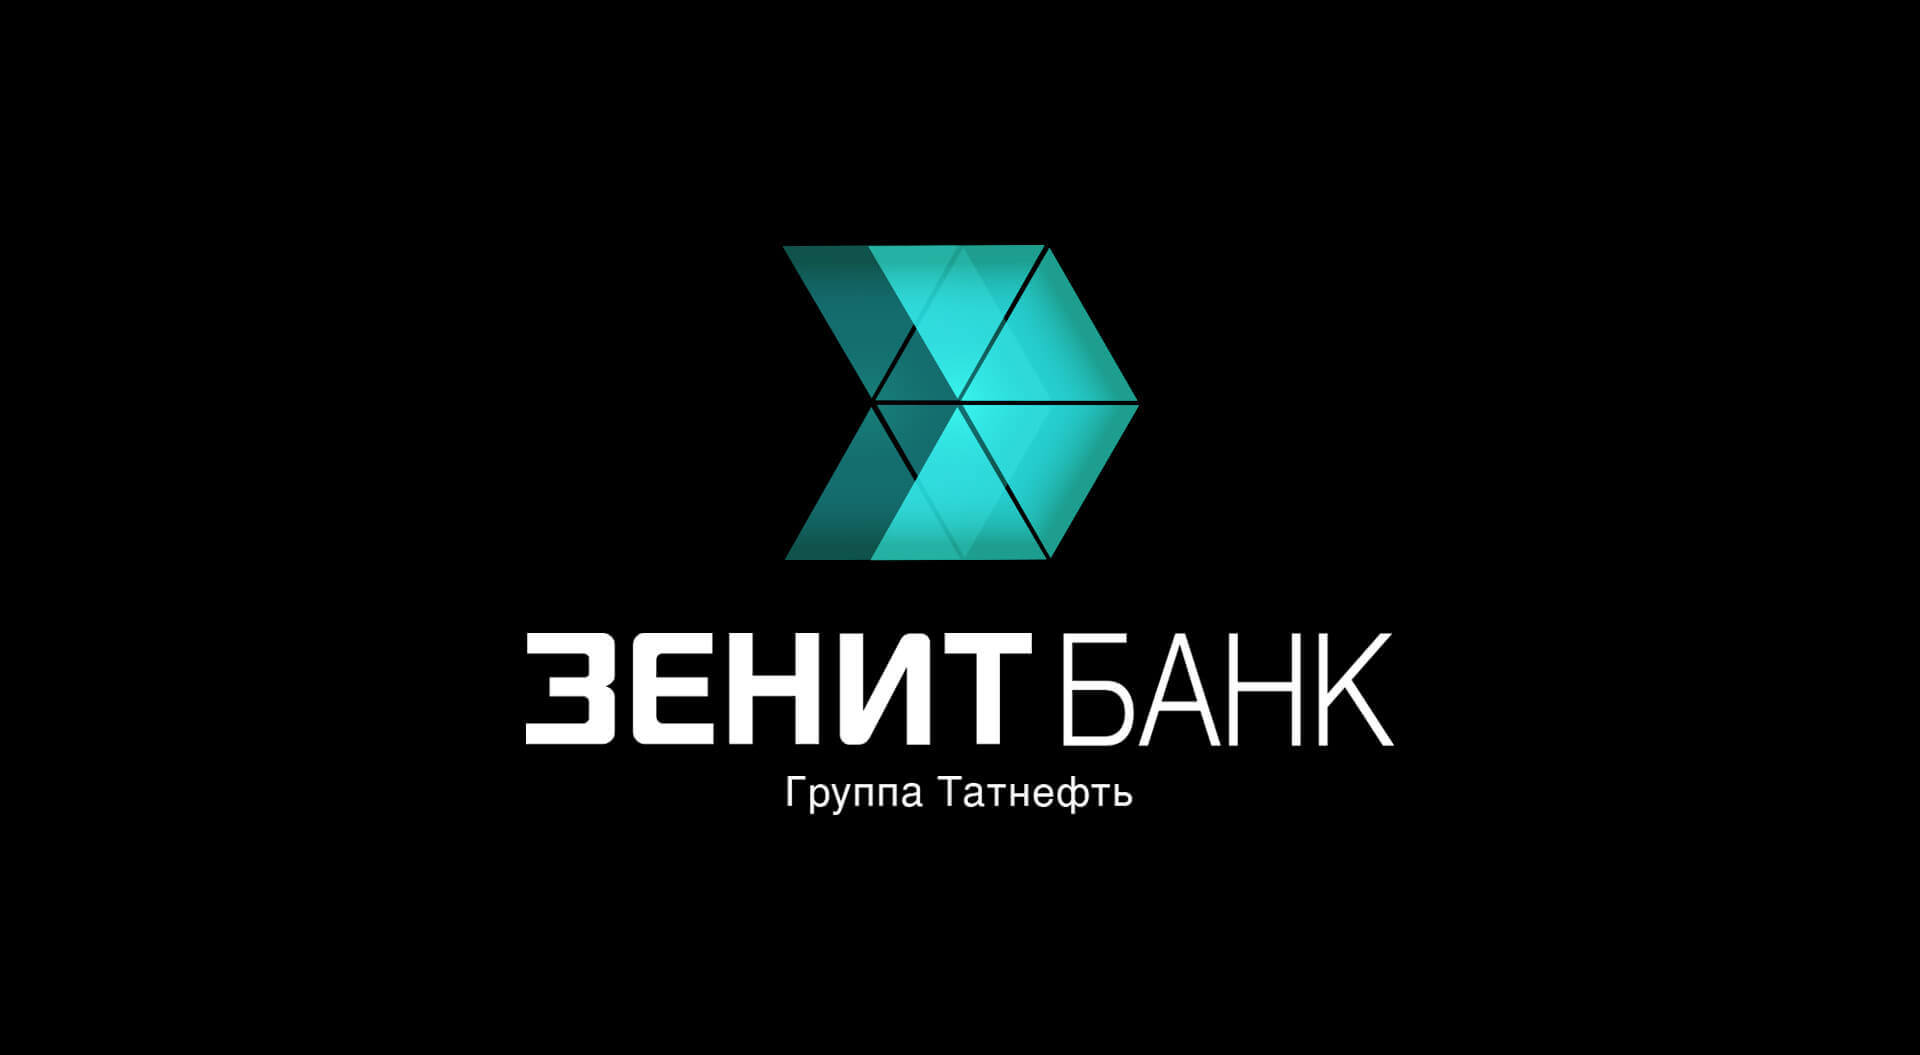 Zenit Bank Russia, Retail Branding, Brand Identity, Graphic Communications - Campbell 
Rigg Agency